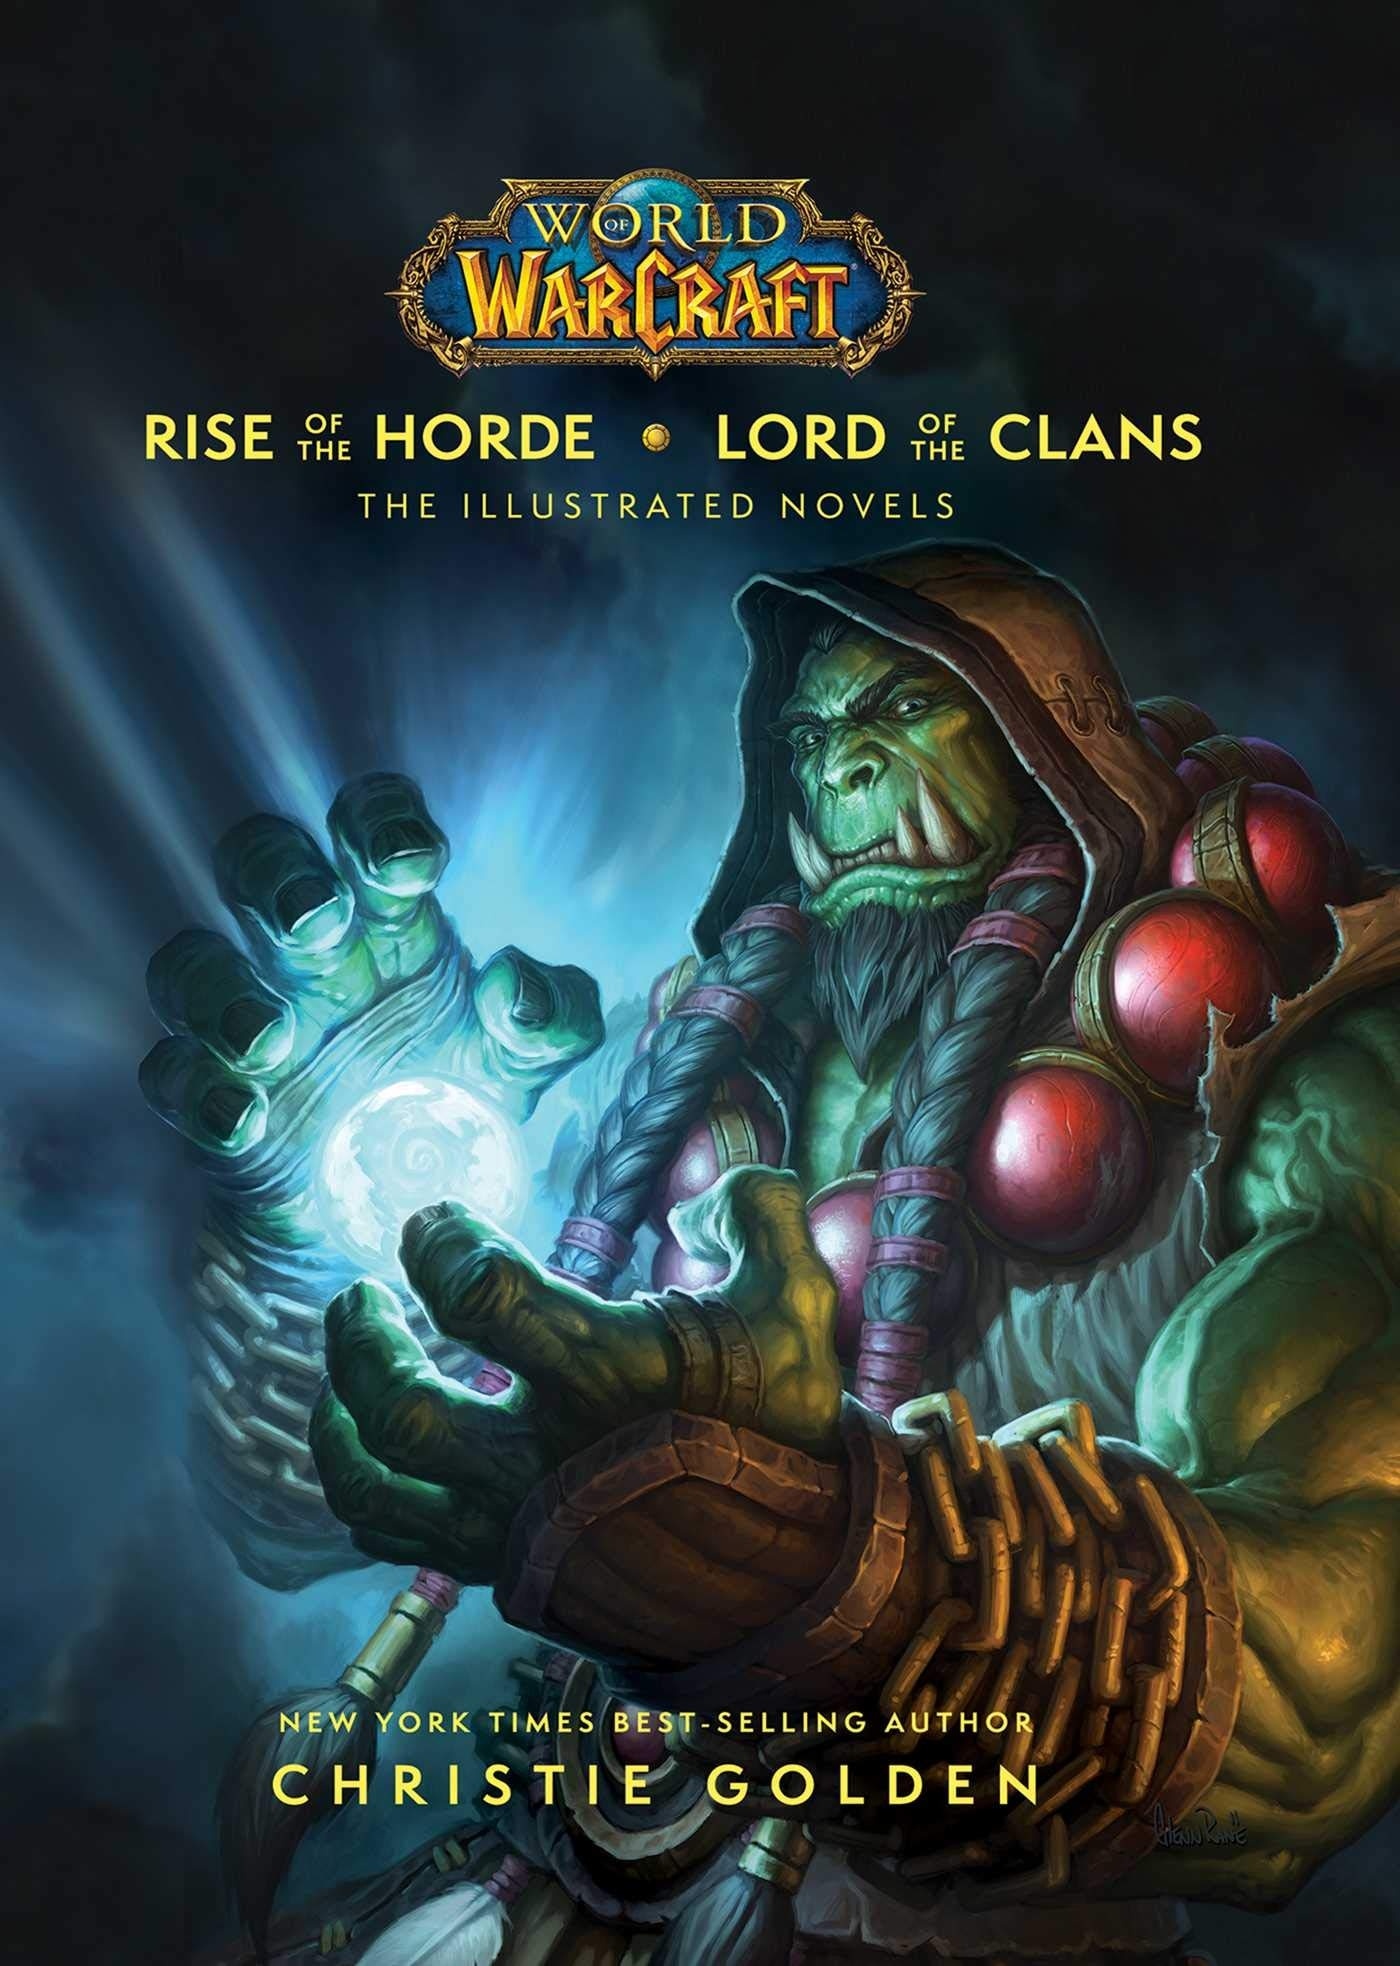 Rise of the Horde - Warcraft Chronicle Vol. 2 [Lore] 